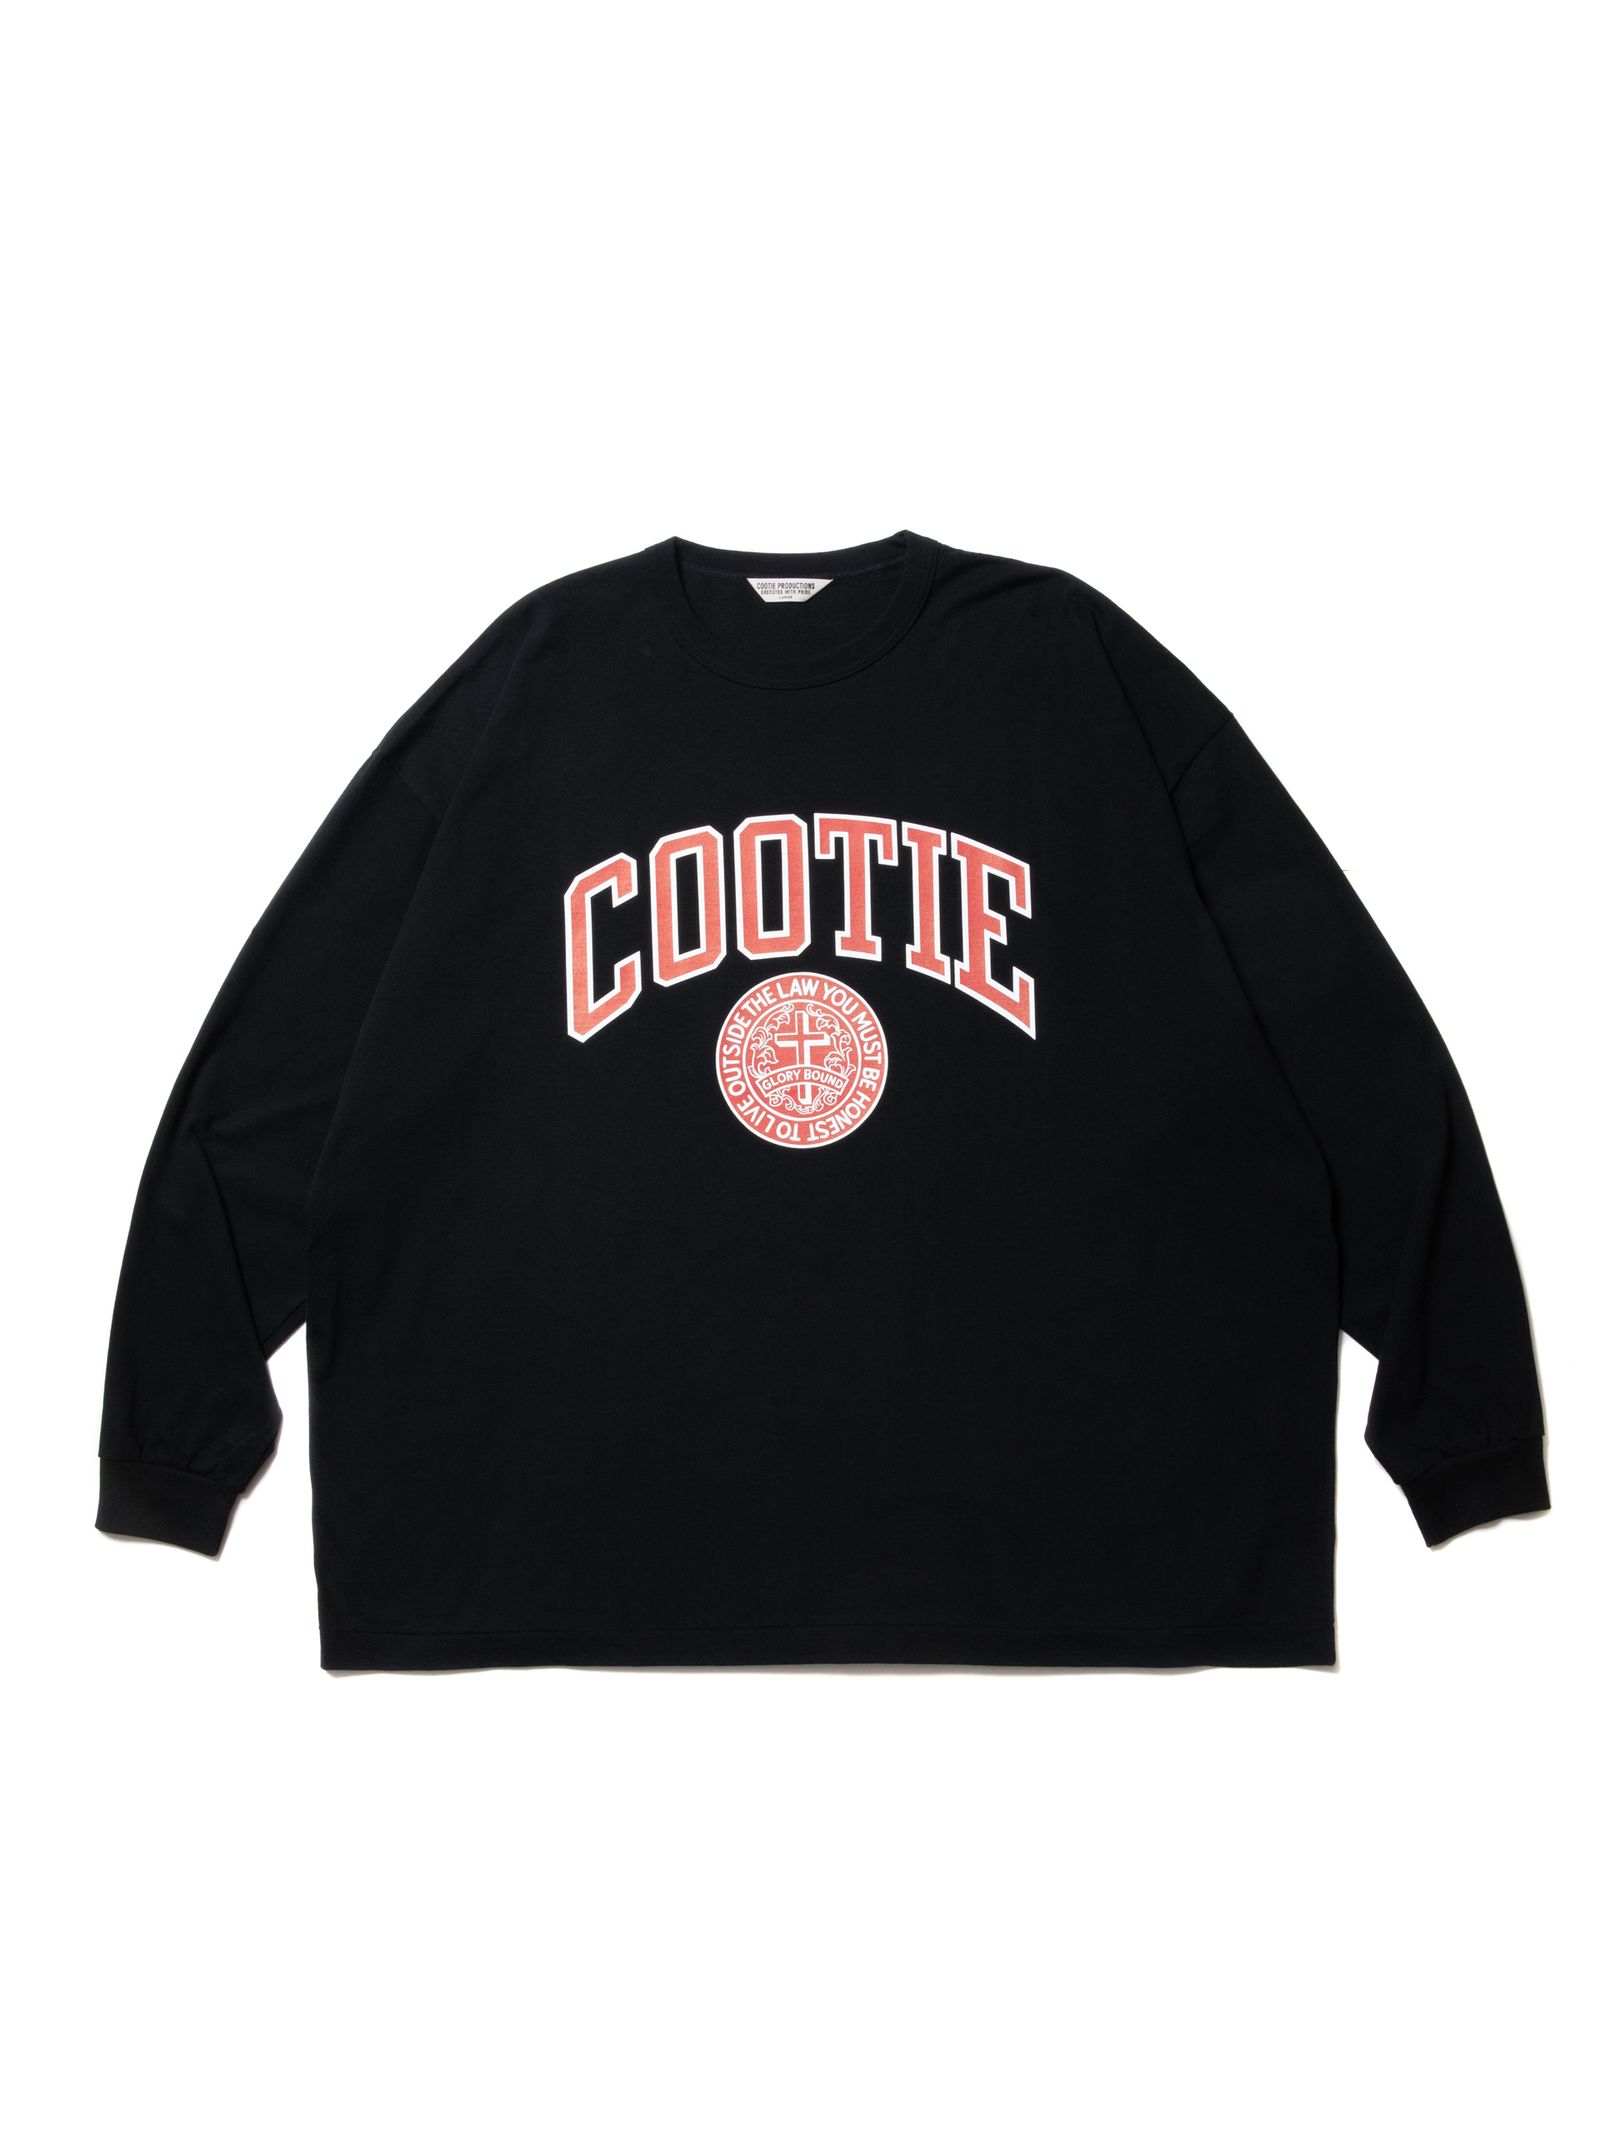 COOTIE PRODUCTIONS - Print Oversized L/S Tee (COLLEGE) (BLACK